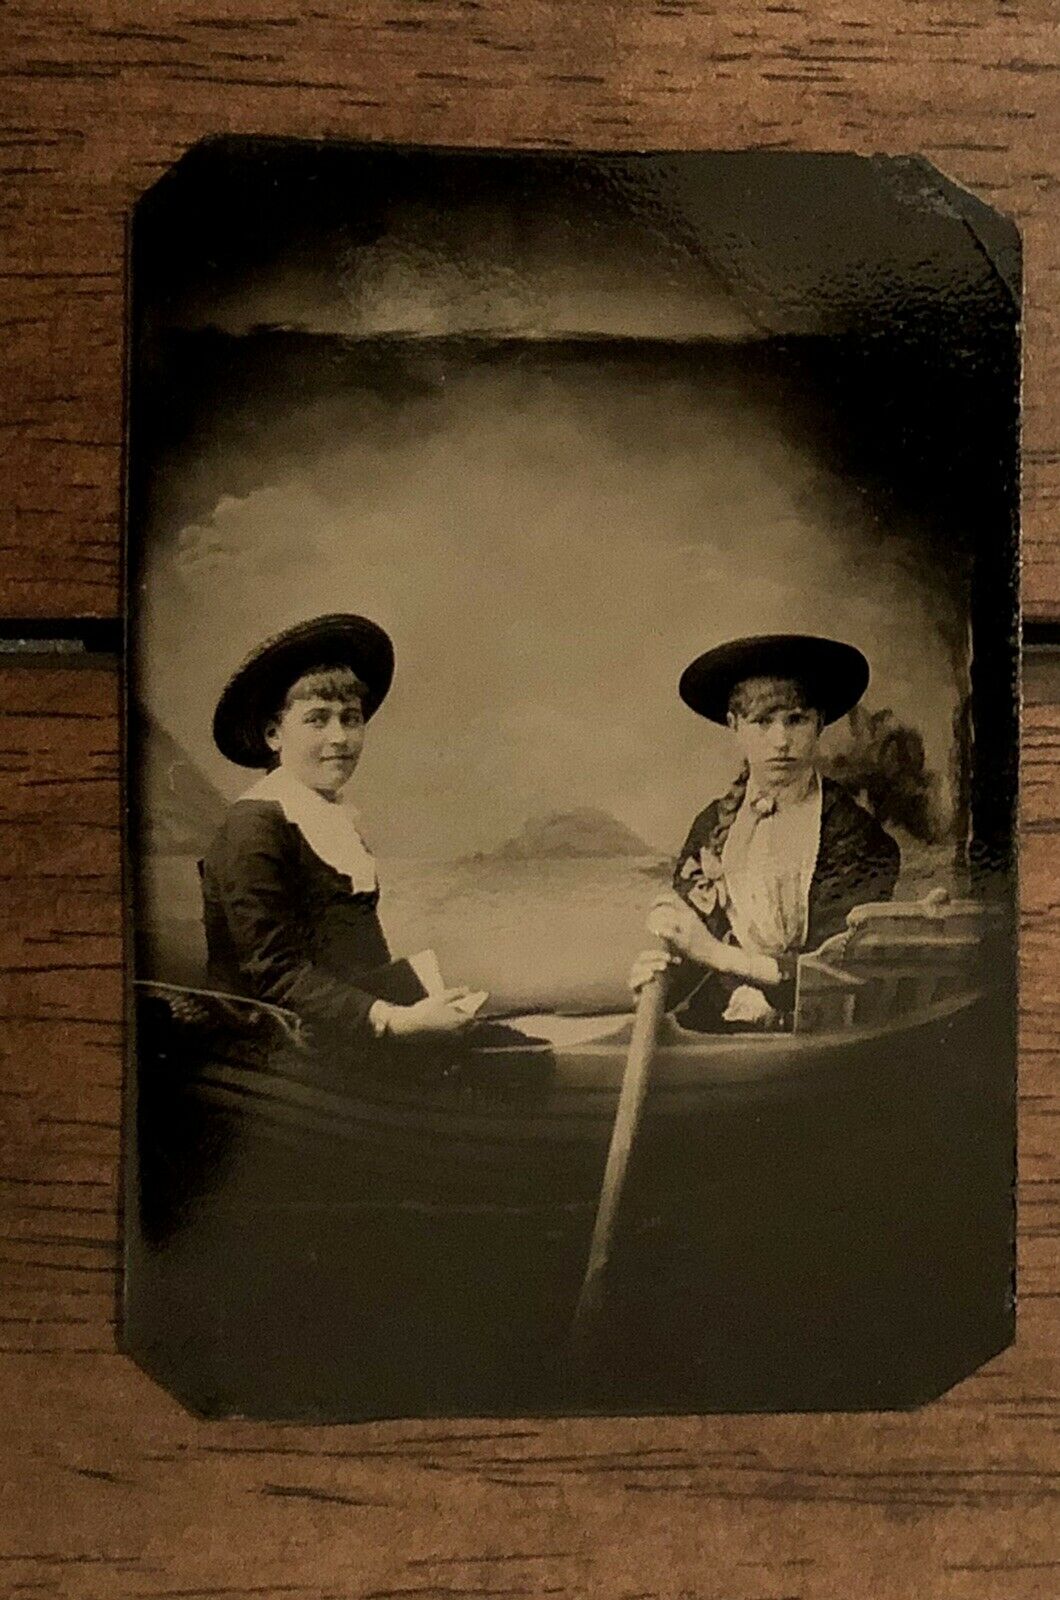 Antique / 1800s Tintype Photo Two Girls Young Women Rowing A Prop Boat - EXCOND!